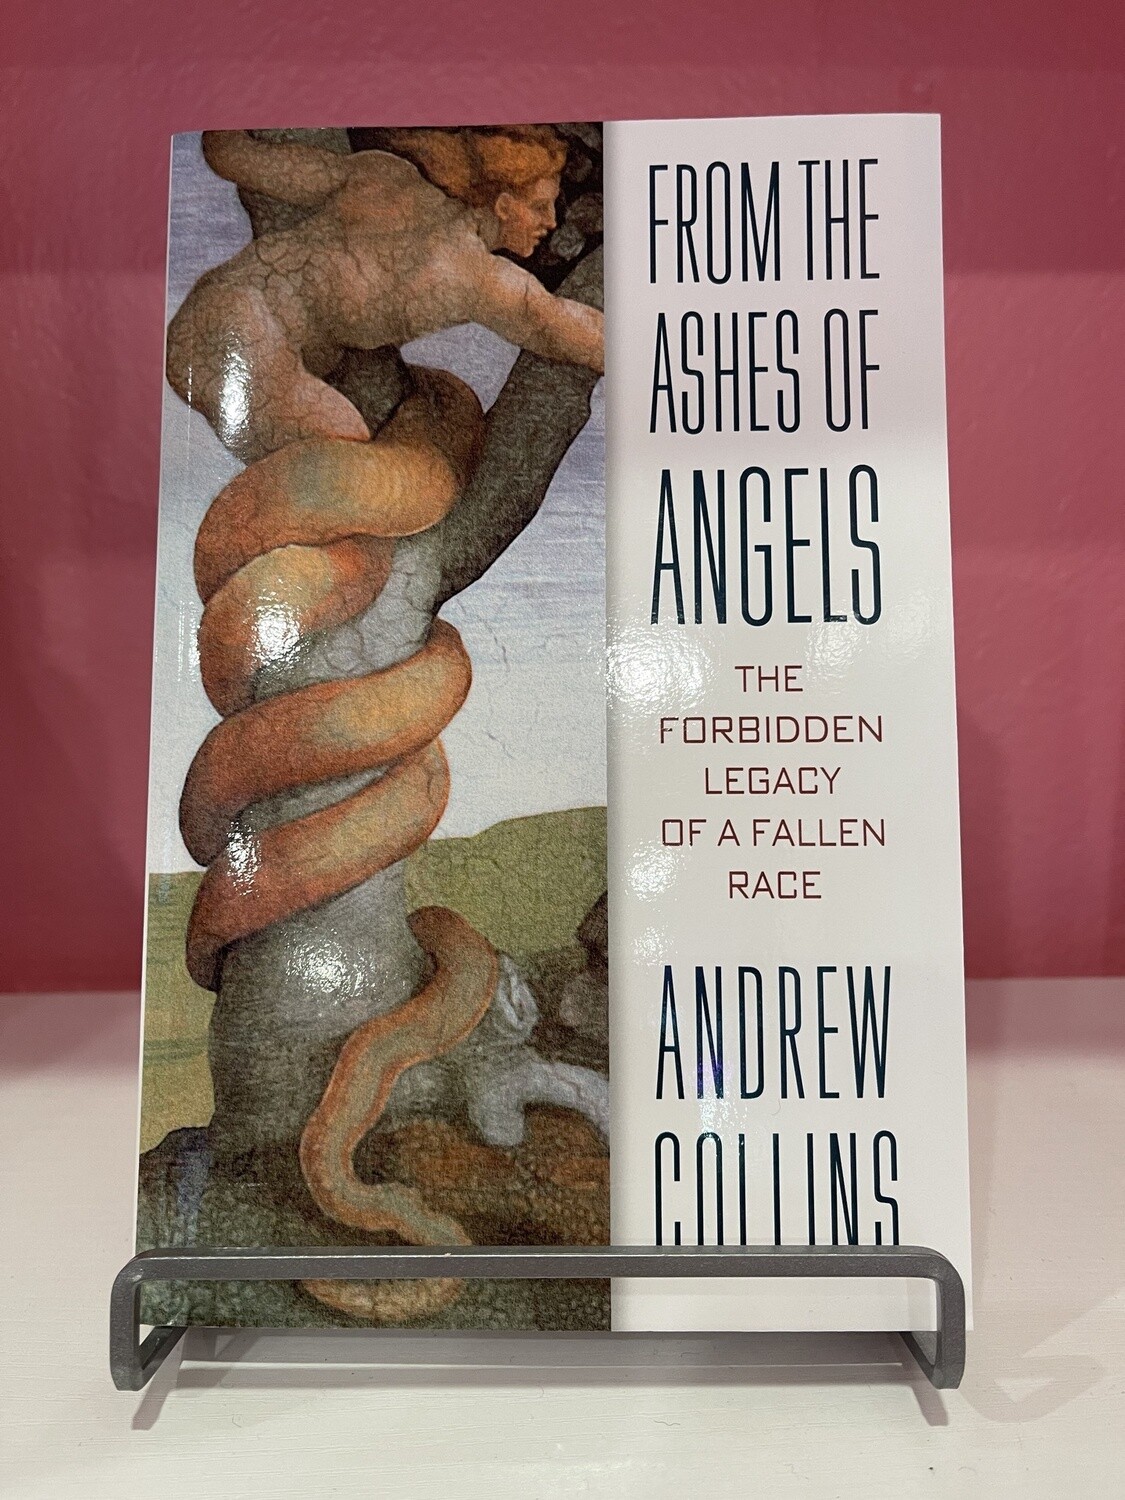 From the Ashes of Angels: The Forbidden Legacy of a Fallen Race (Original)